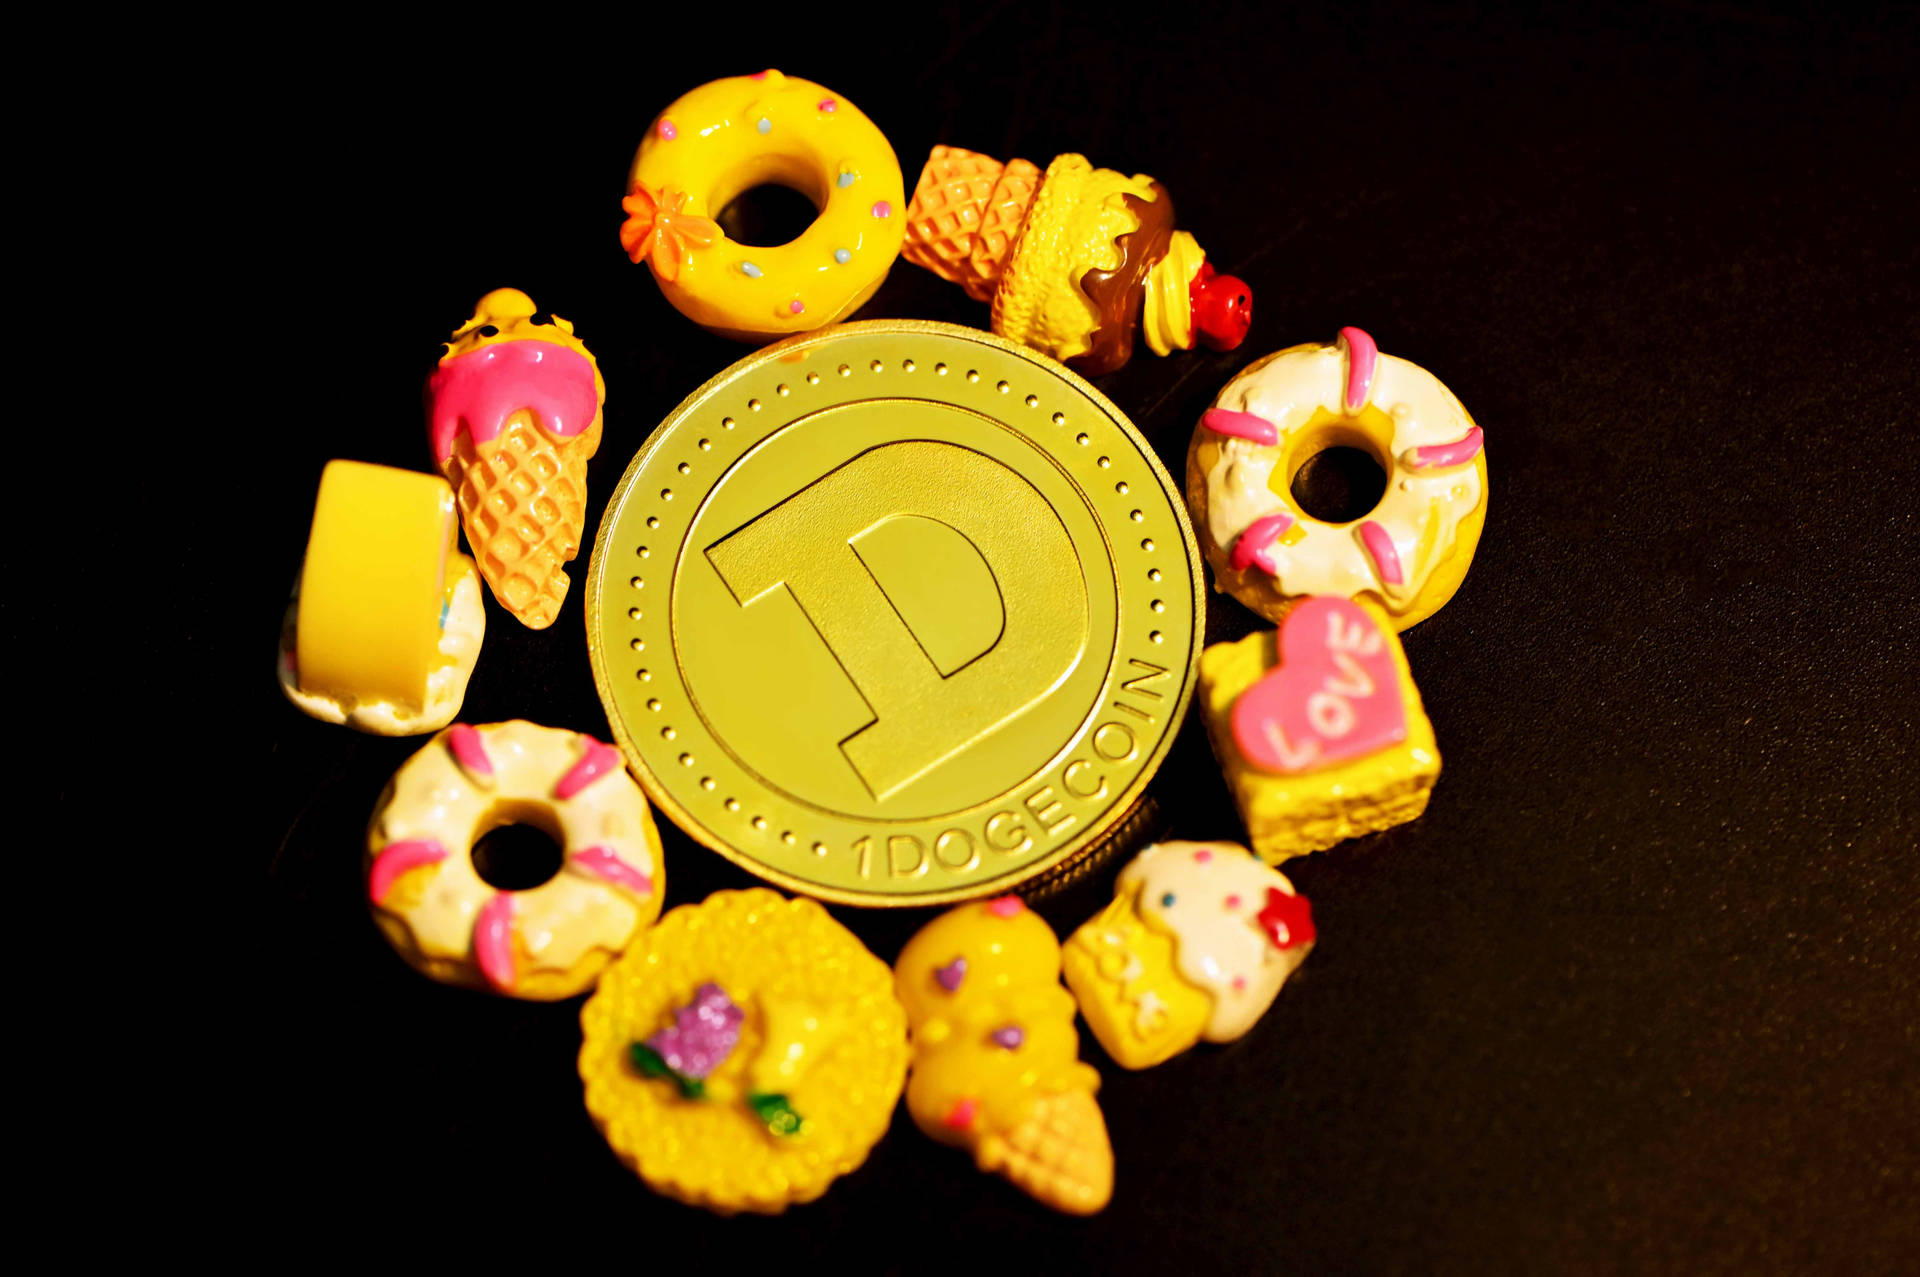 Dogecoin Sweets Black Background